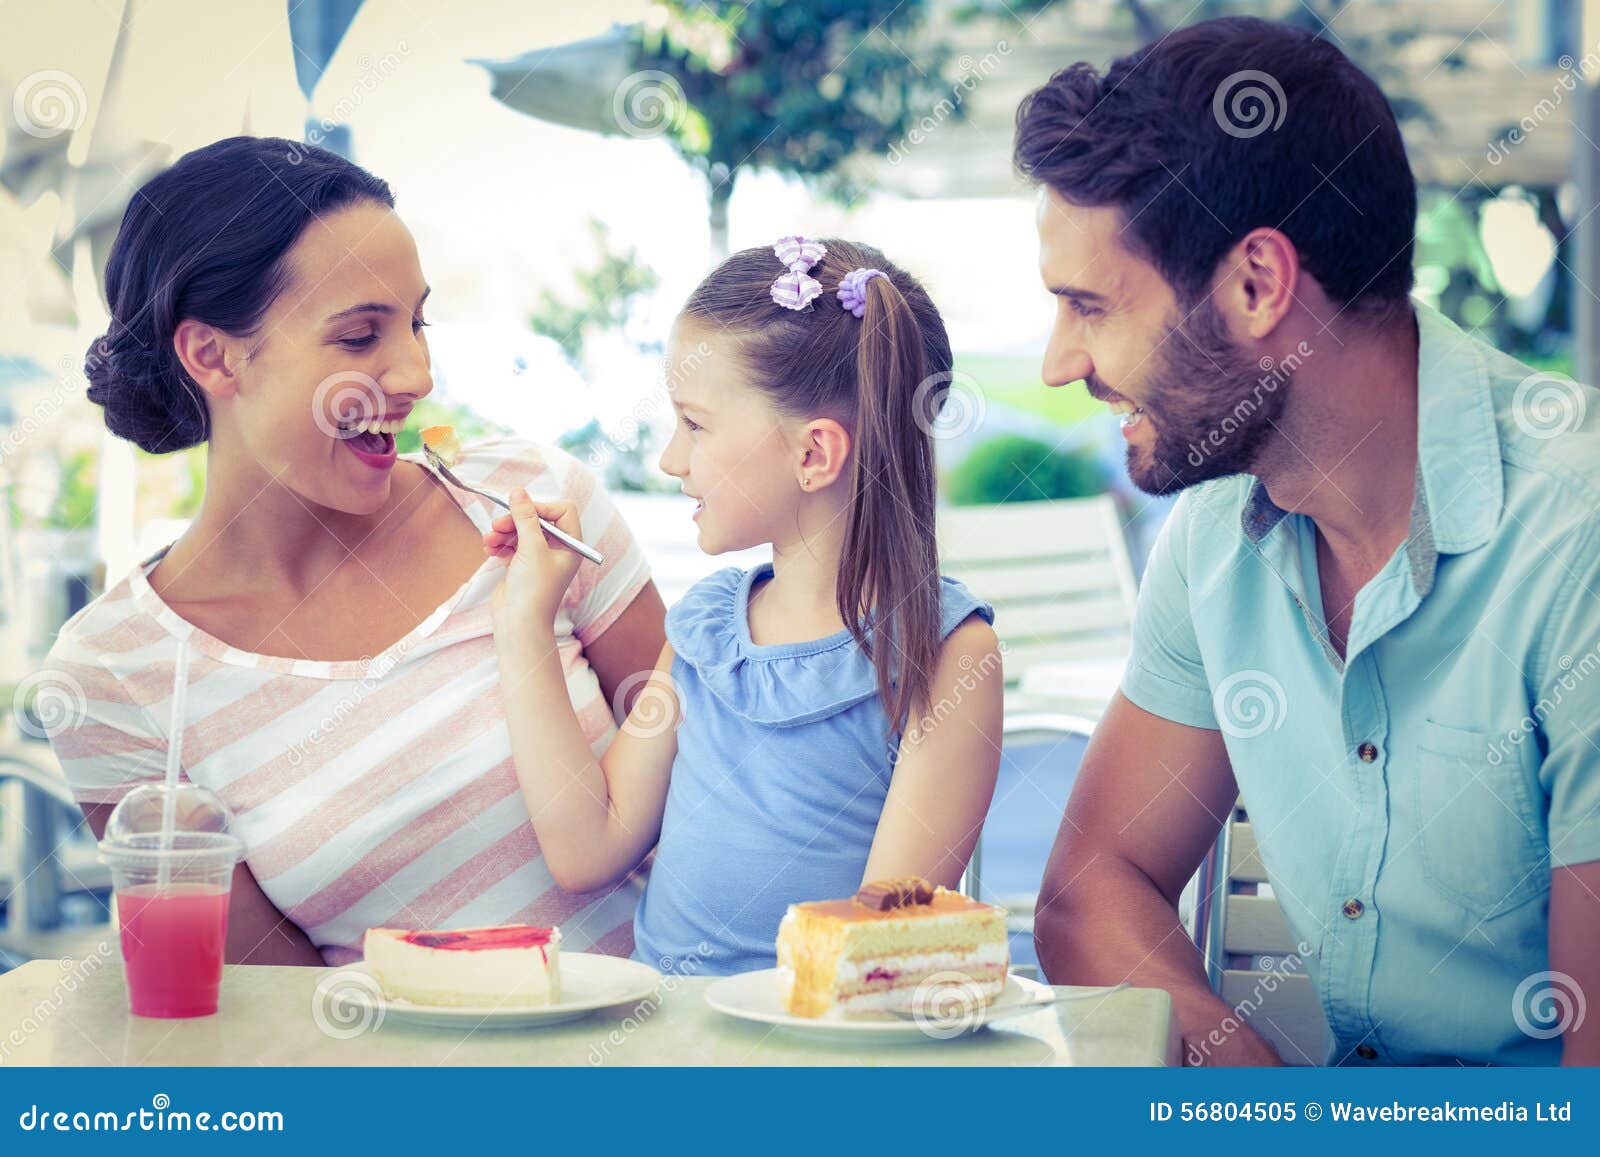 A Family Eating at the Restaurant Stock Image - Image of people